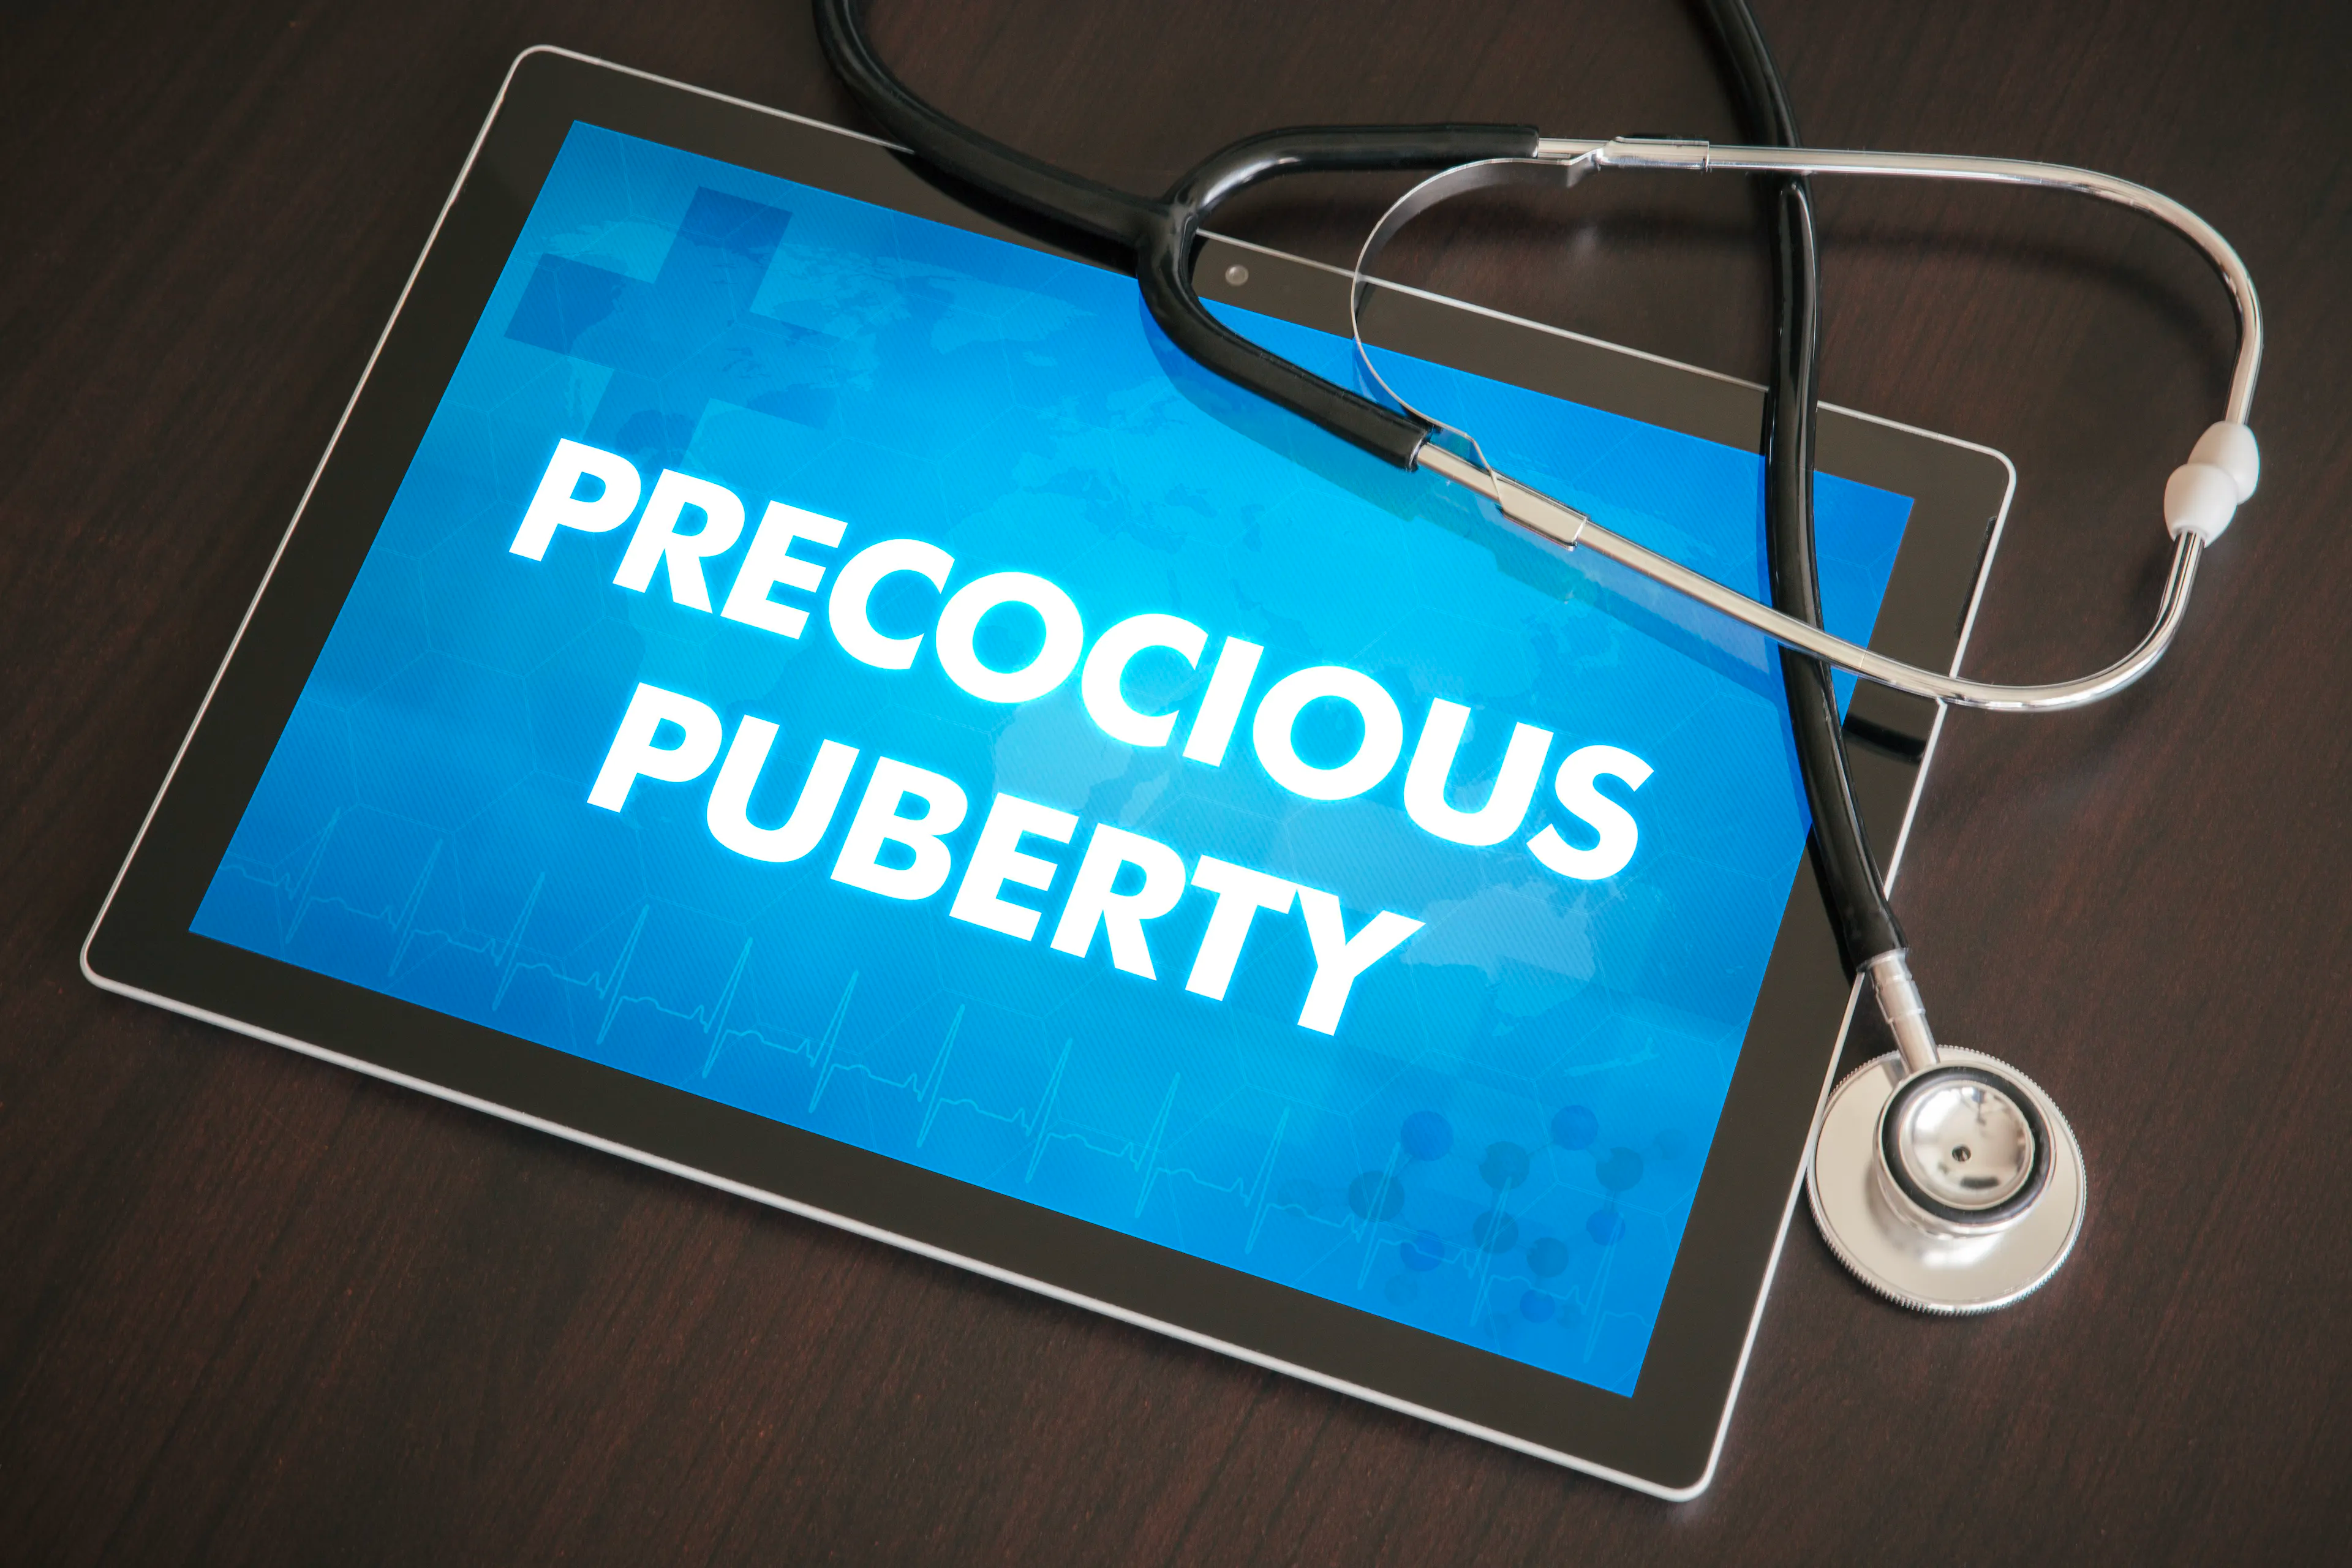 Early puberty rates increased during the COVID-19 pandemic Image Credit: © ibreakstock - © ibreakstock - stock.adobe.com.